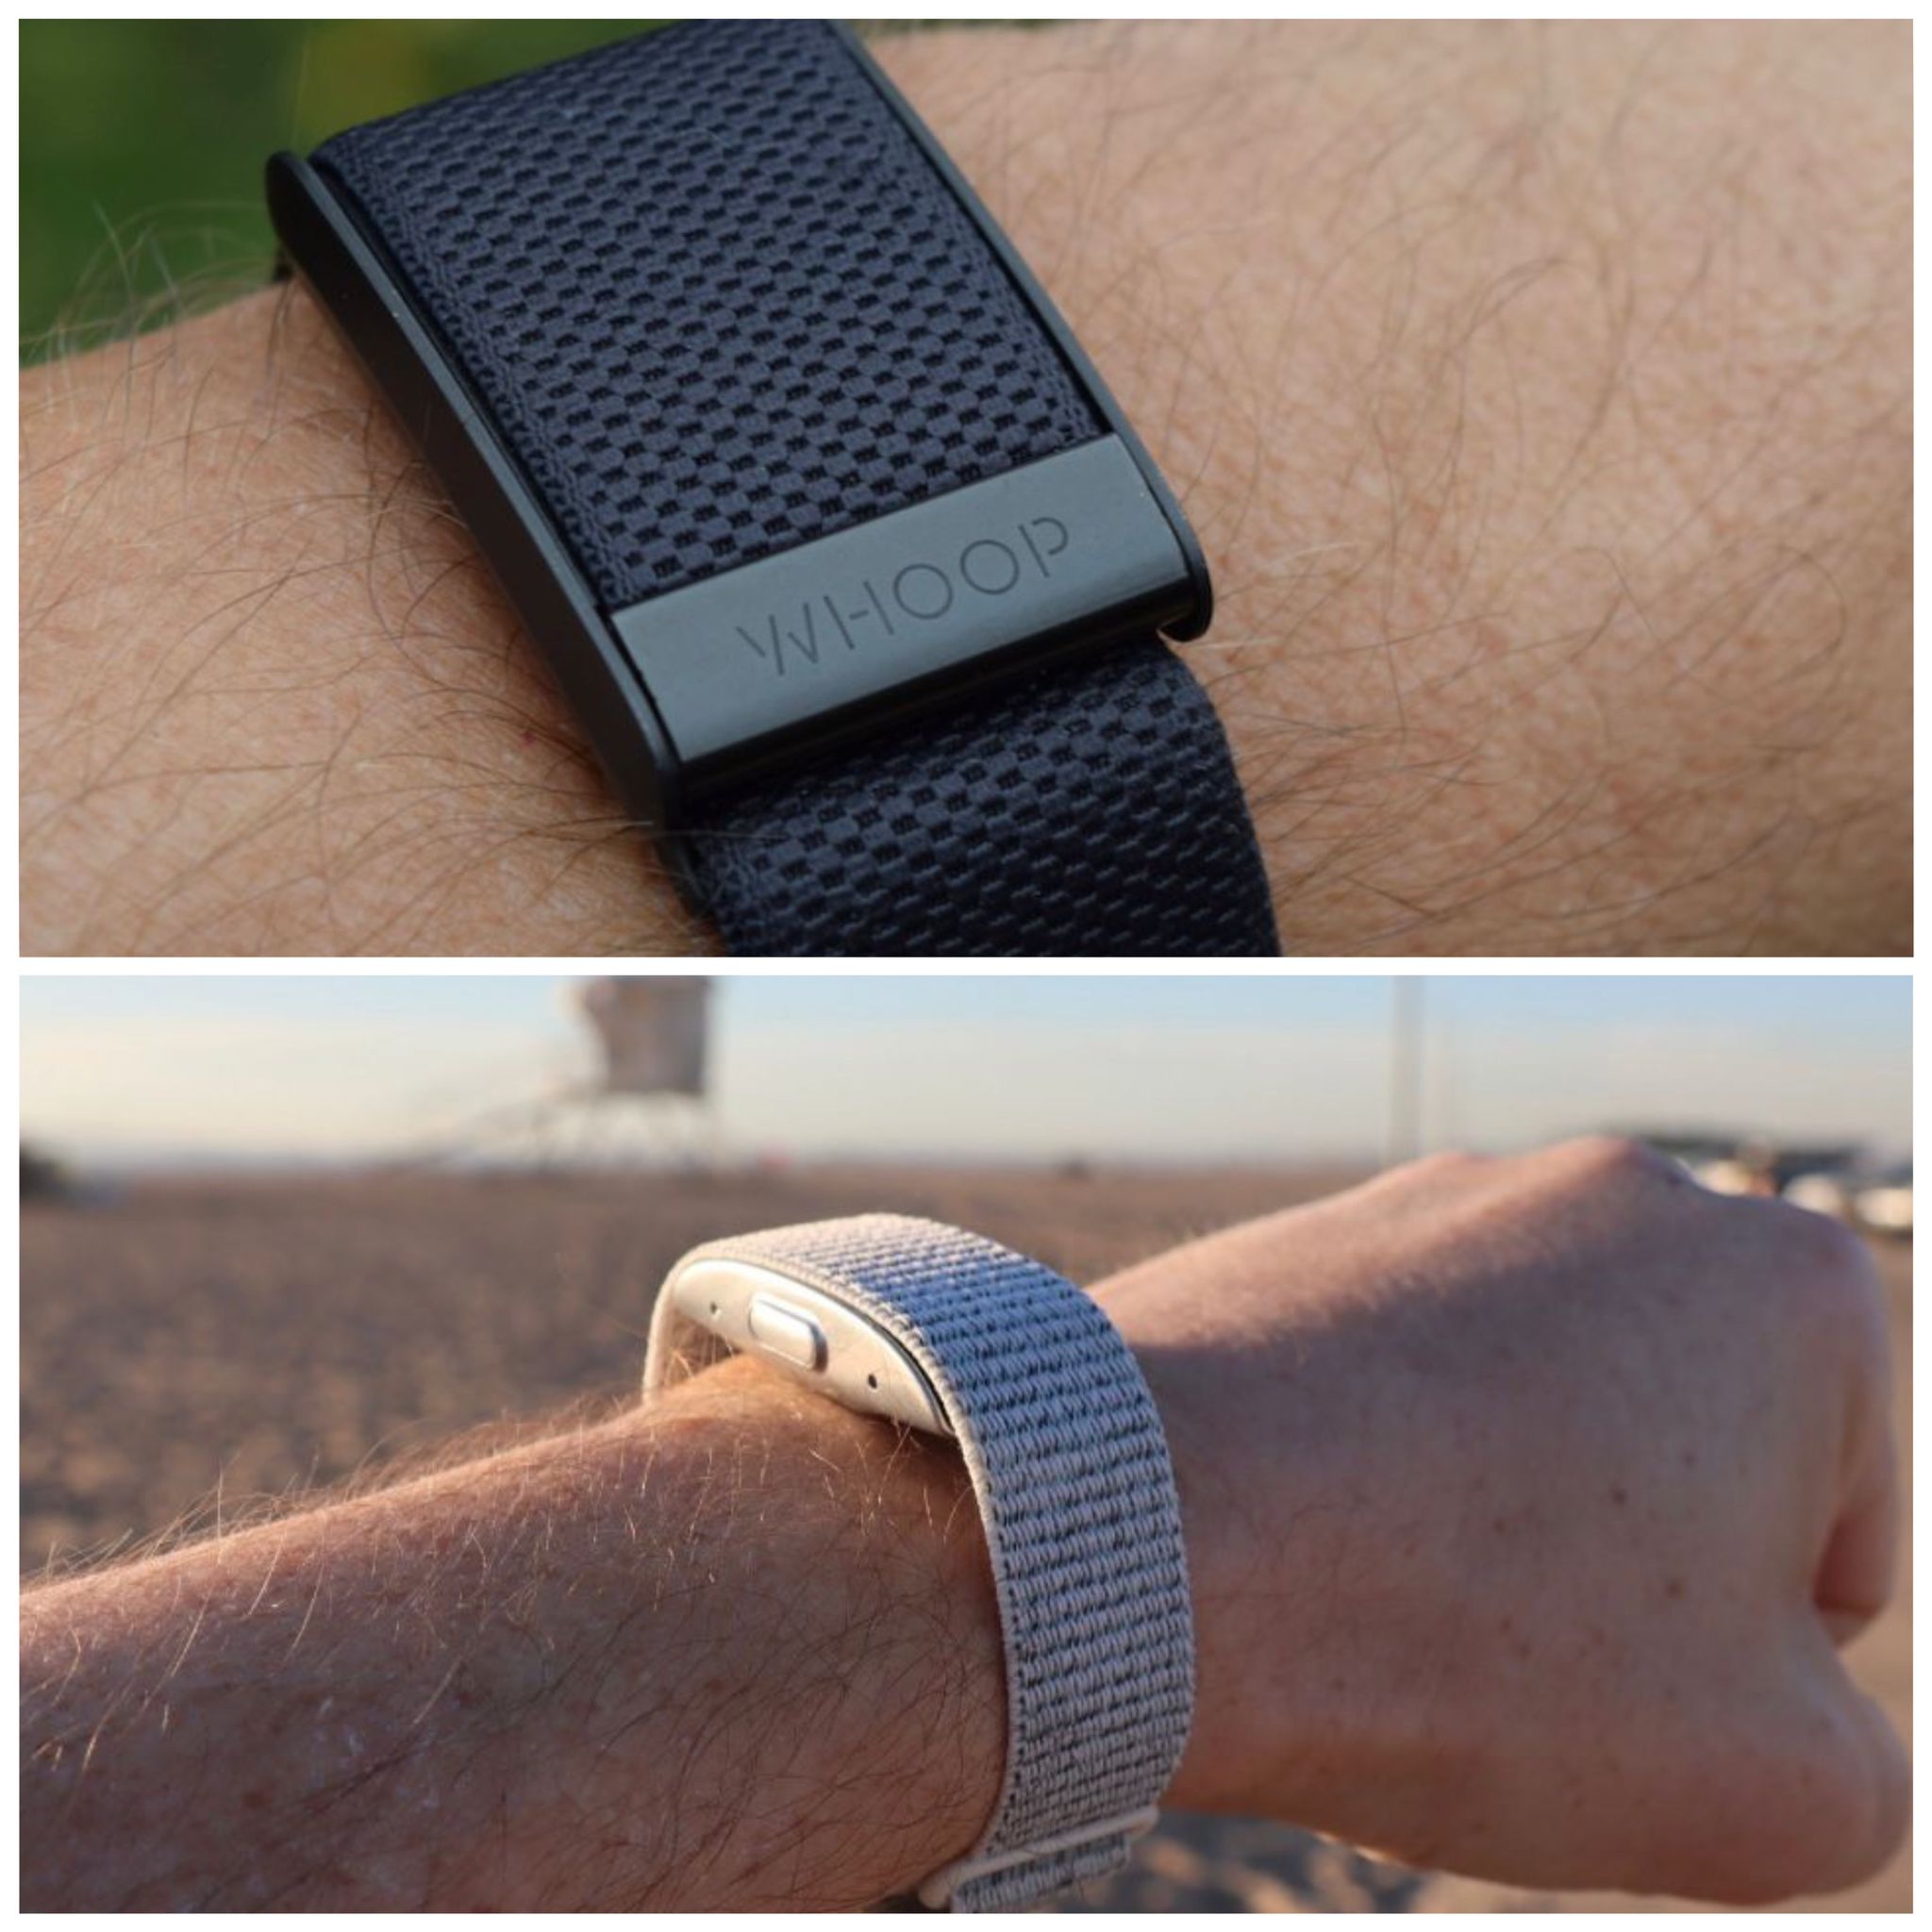 Amazon Halo vs Whoop: Which Wearable Has the Best Features